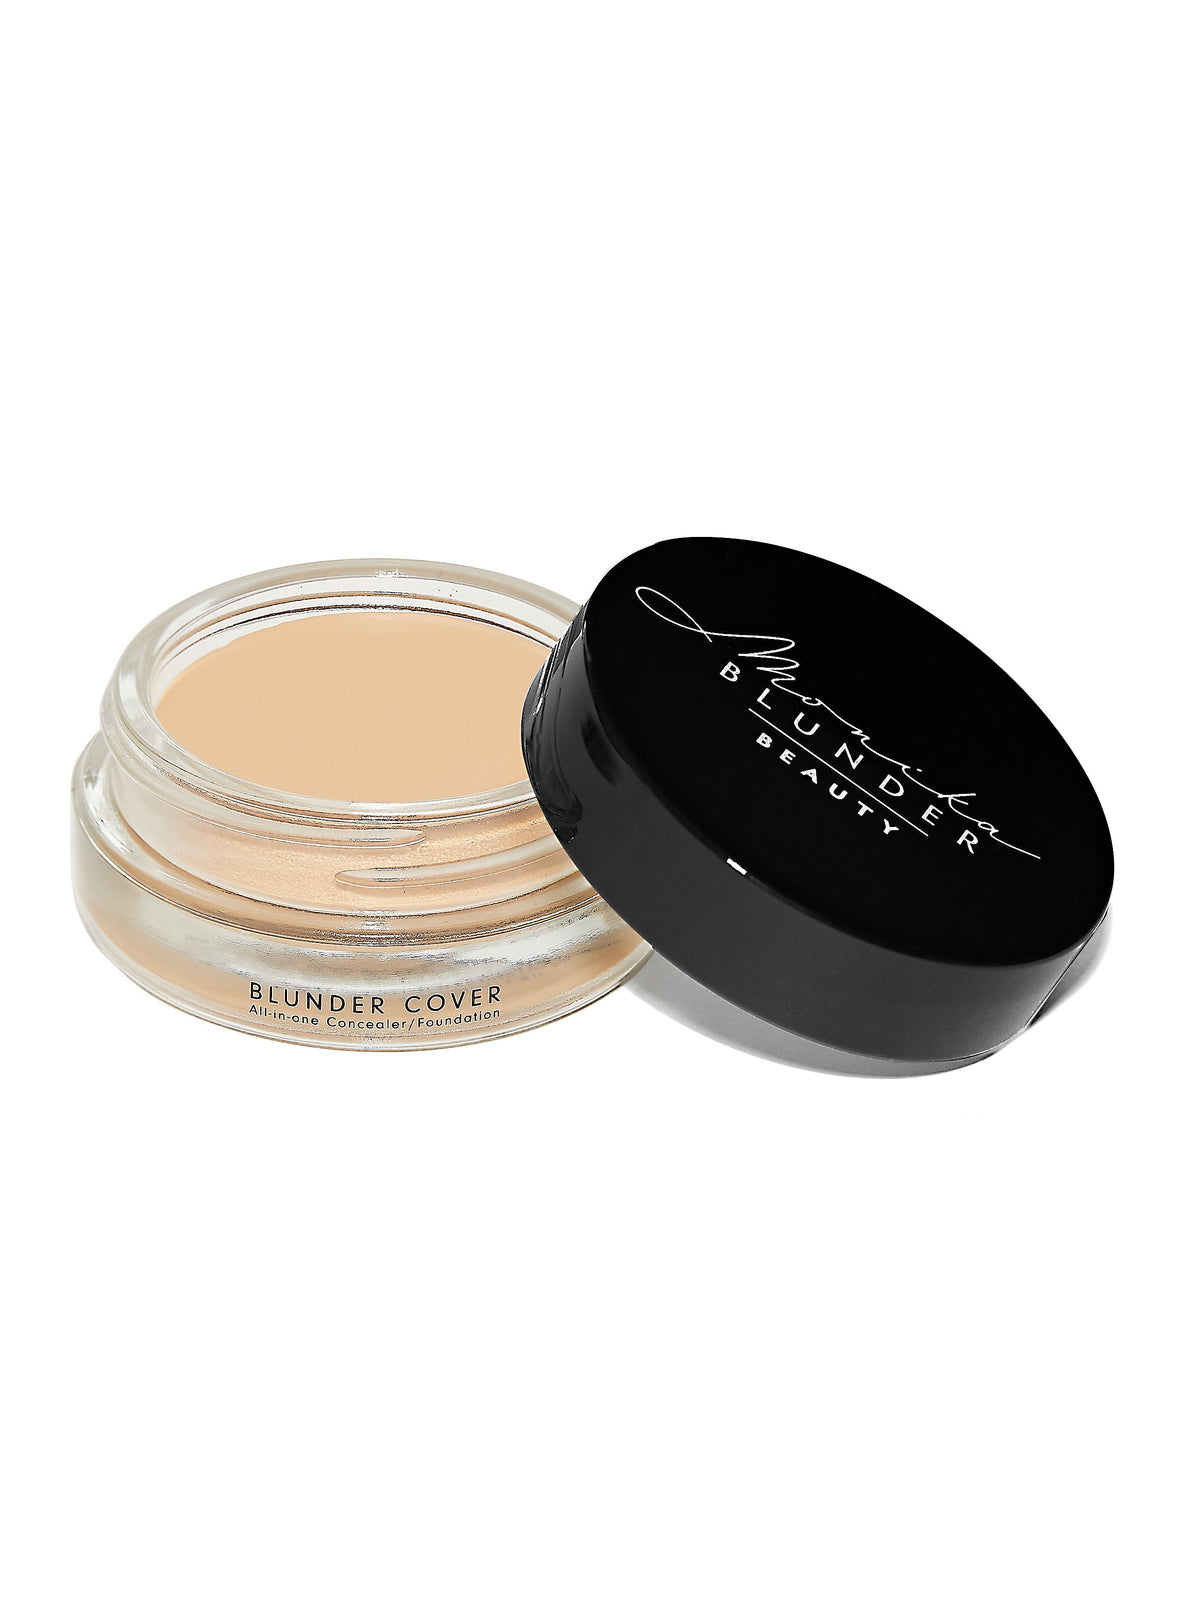 2.5 ZWEI.5 Blunder Cover All-in-One Concealer/ Foundation